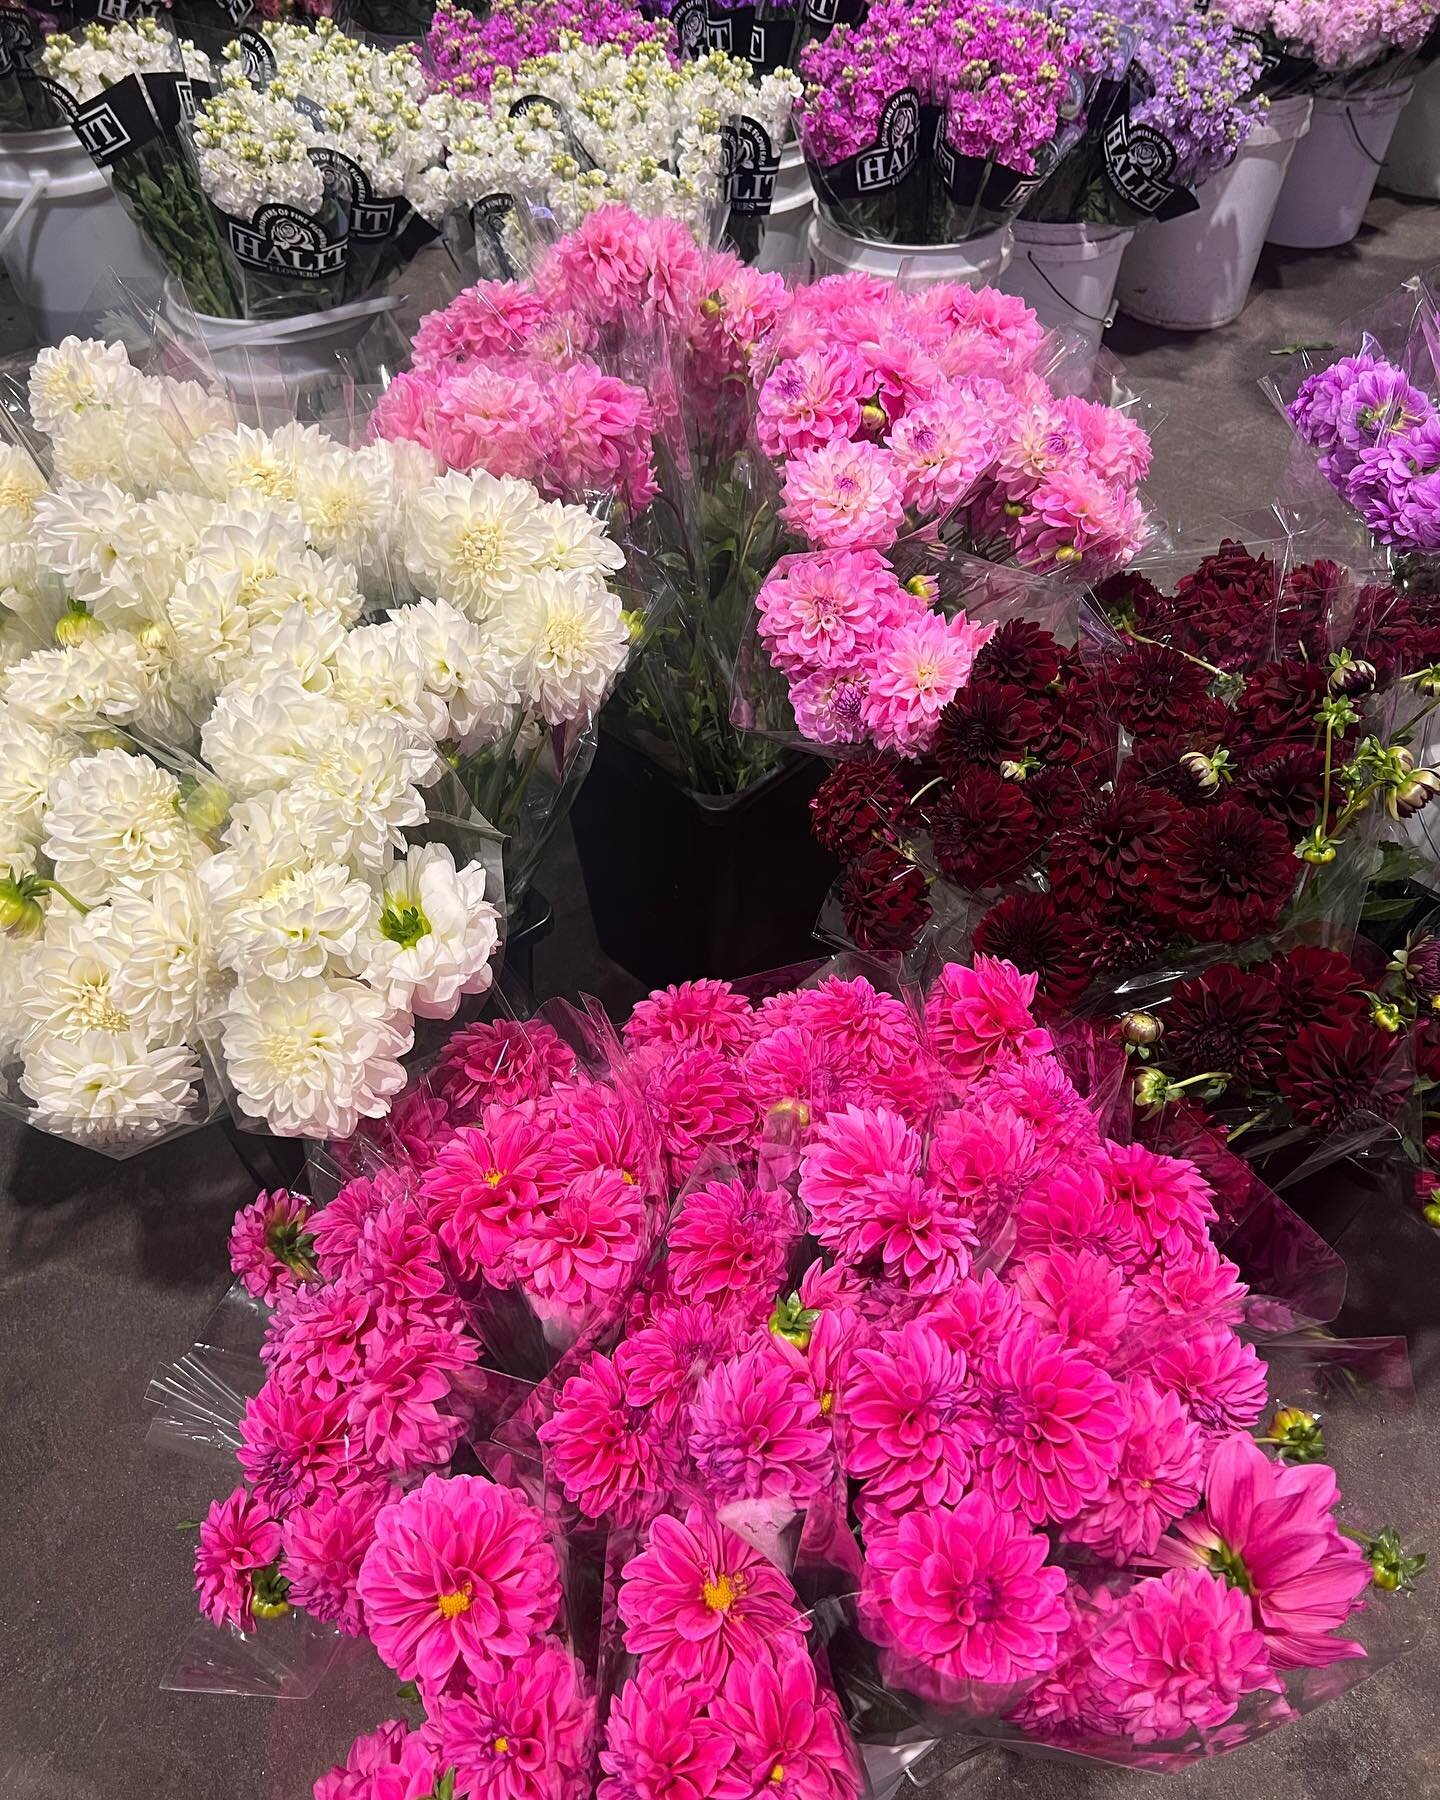 How pretty are these Dahlia colours 💖💜

What an amazing sight to see 😍

#halitflowers #dahlias #flowers #florals #florists #melbourne #victoria #floraldesign